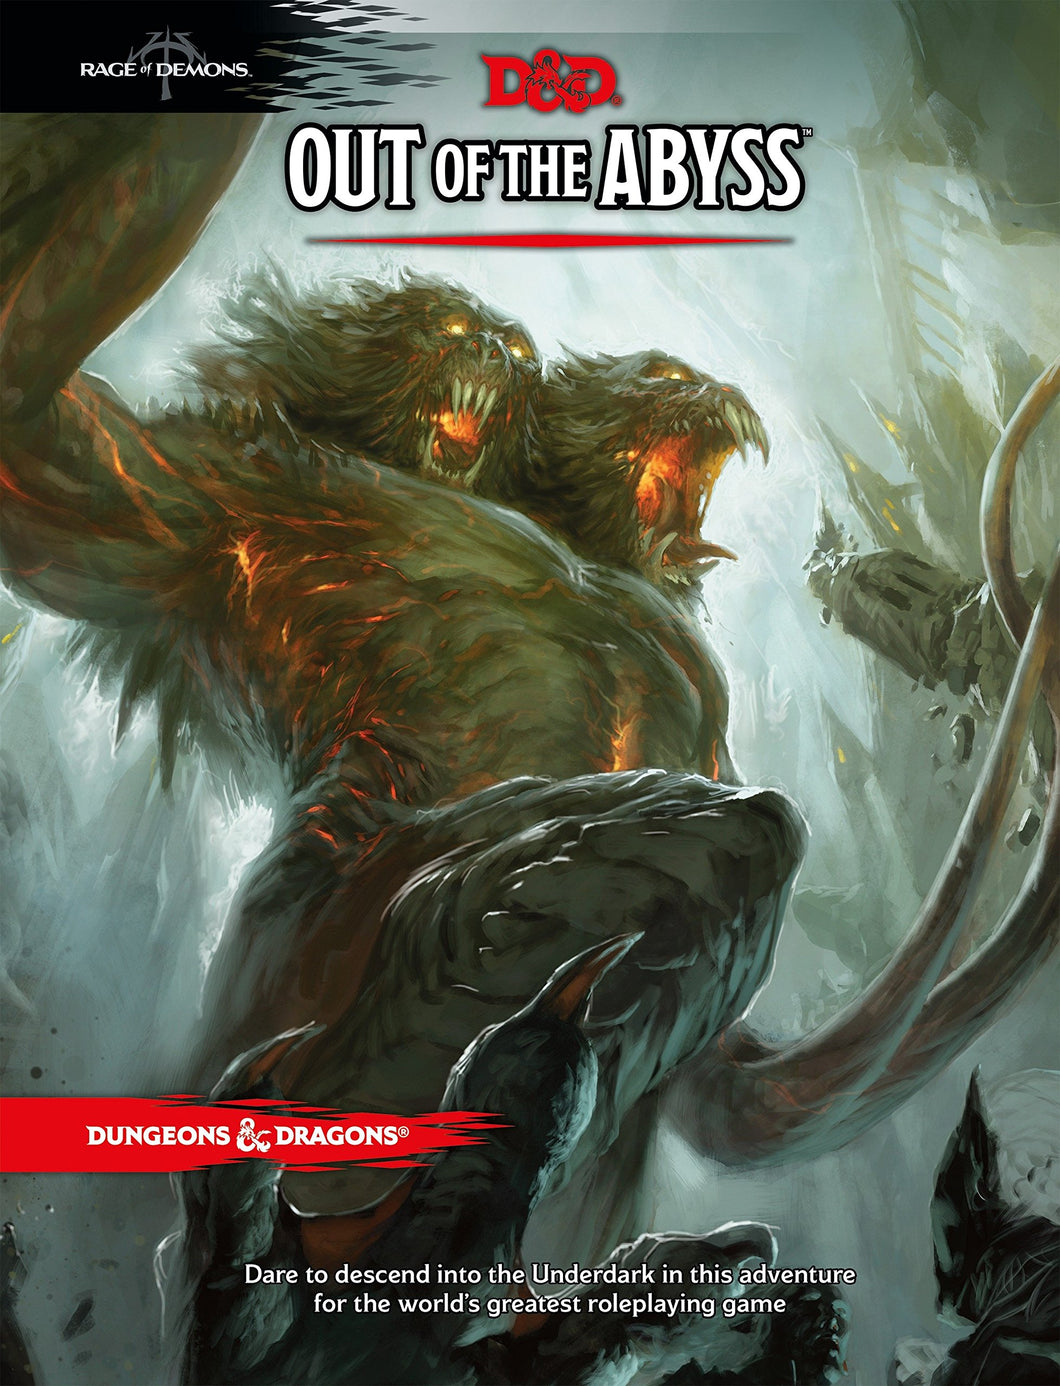 D&D Out of the Abyss 5th Ed.